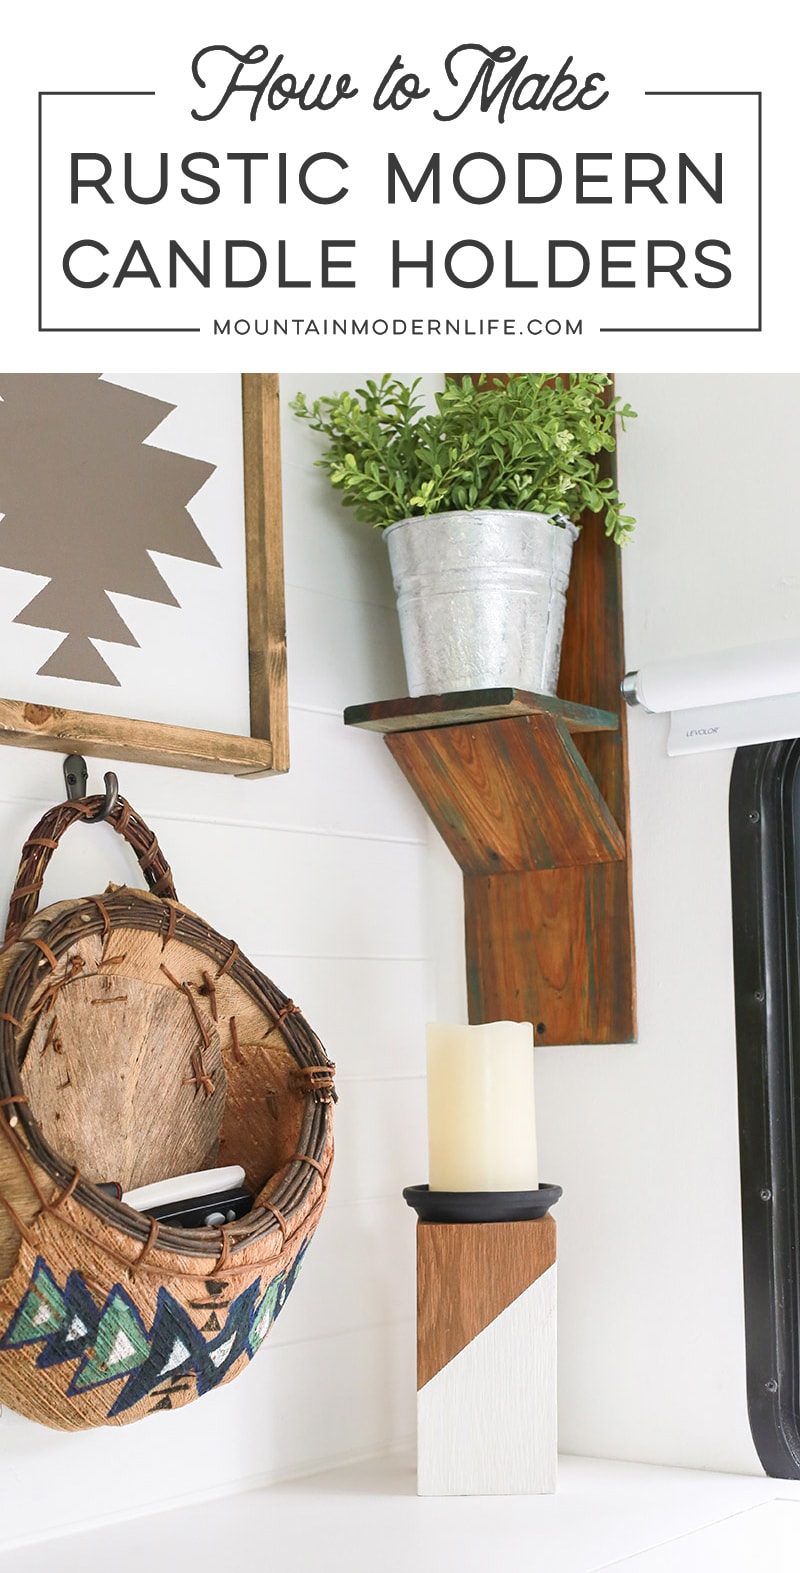 How to Make Rustic Modern Candle Holders